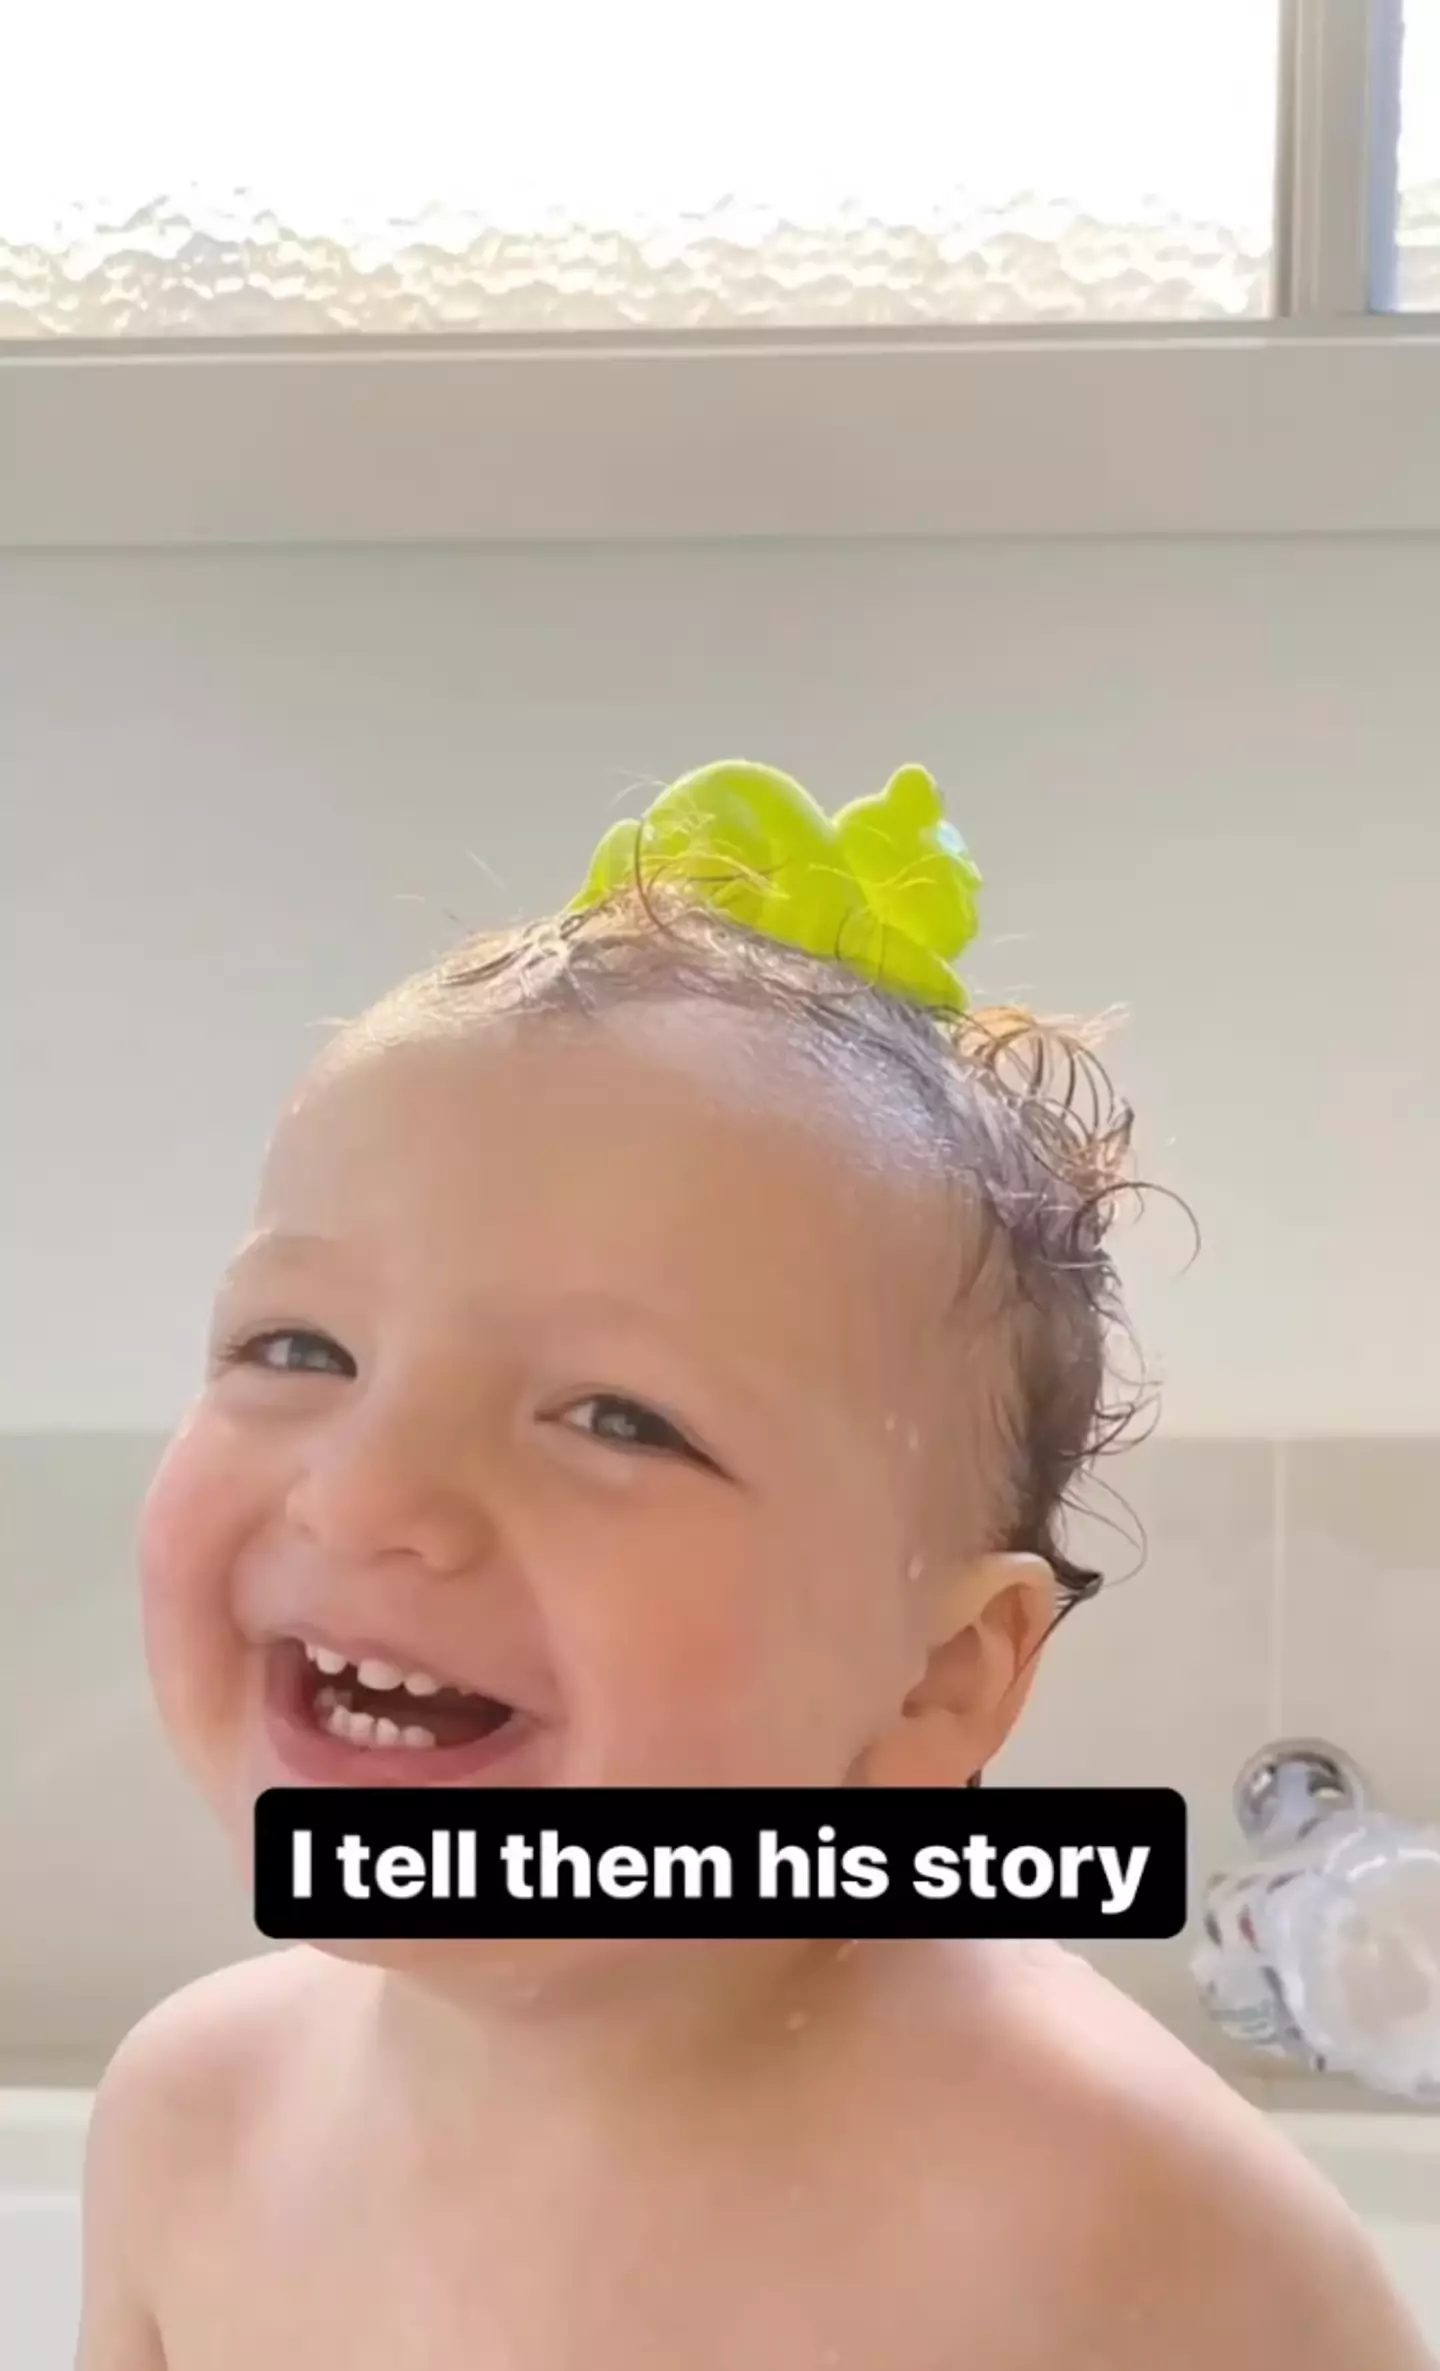 The youngster almost died in the bath. (Instagram/@tinyheartseducation)